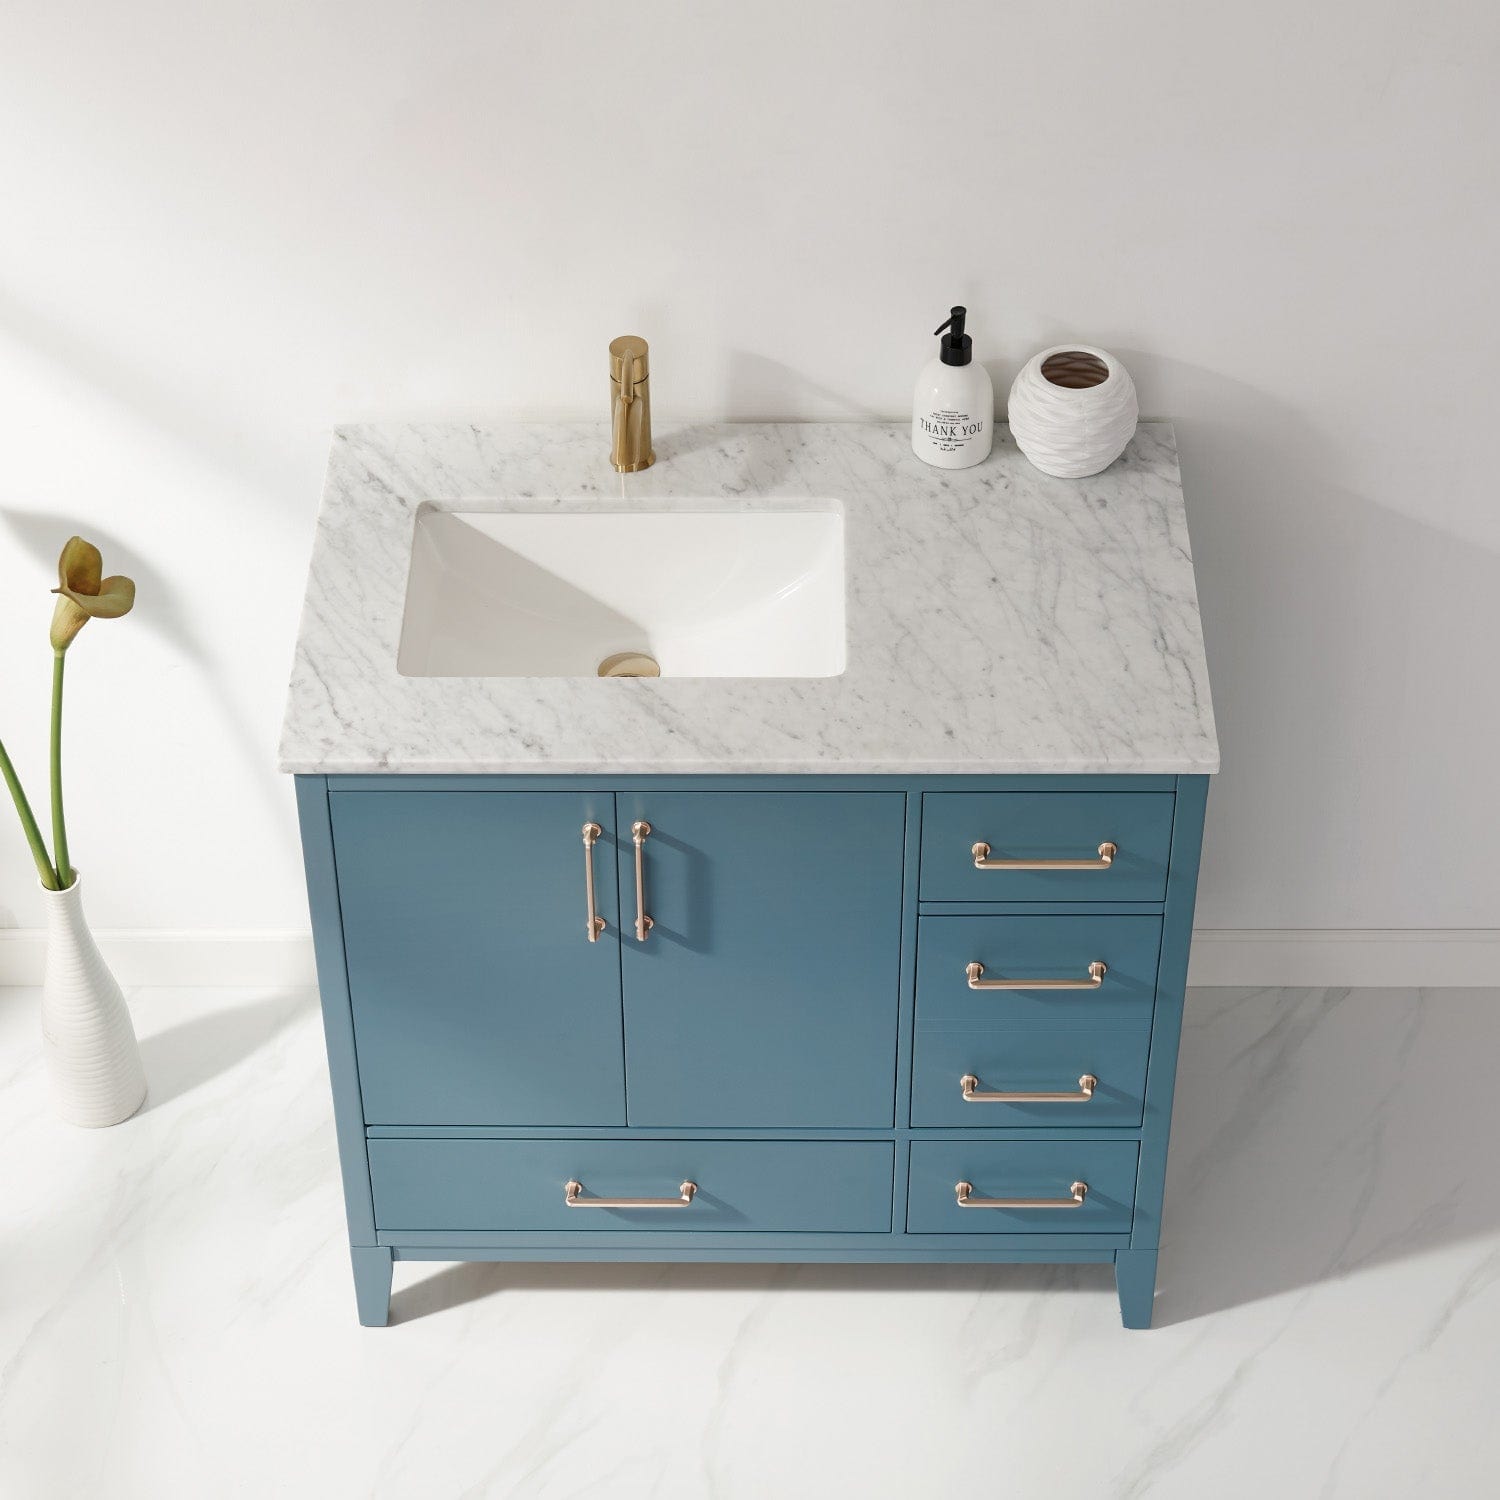 Altair Sutton 36" Single Bathroom Vanity Set in Royal Green and Carrara White Marble Countertop without Mirror 541036-RG-CA-NM - Molaix631112971843Vanity541036-RG-CA-NM